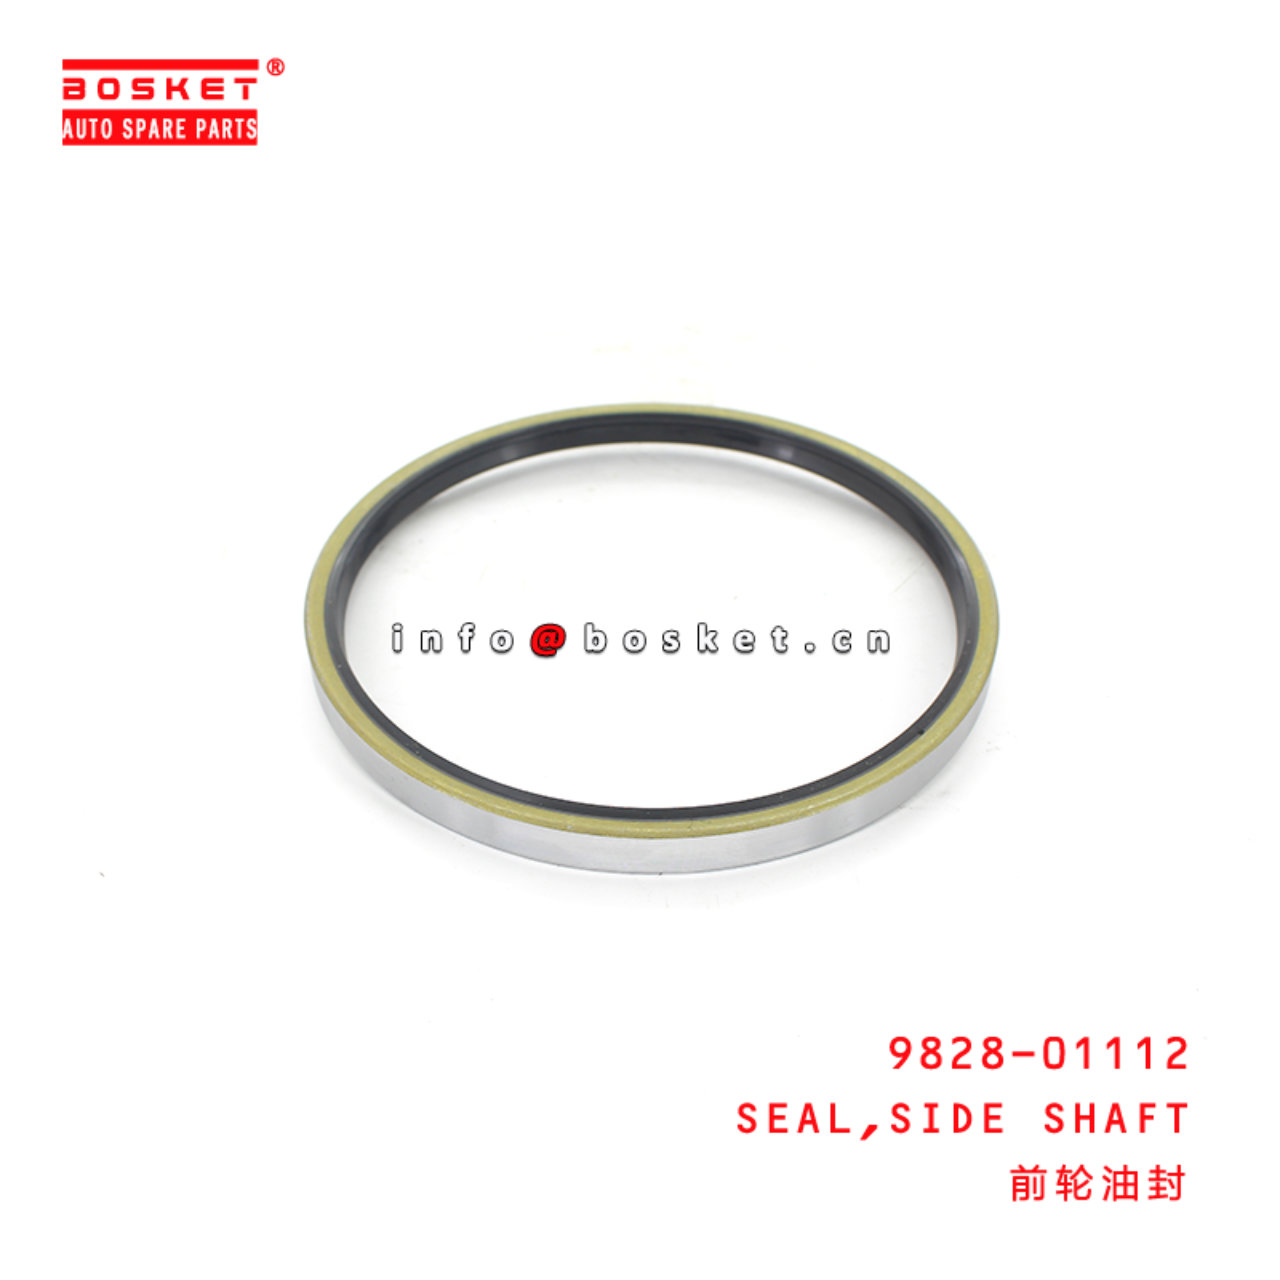 9828-01112 Side Shaft Seal Suitable for ISUZU HINO